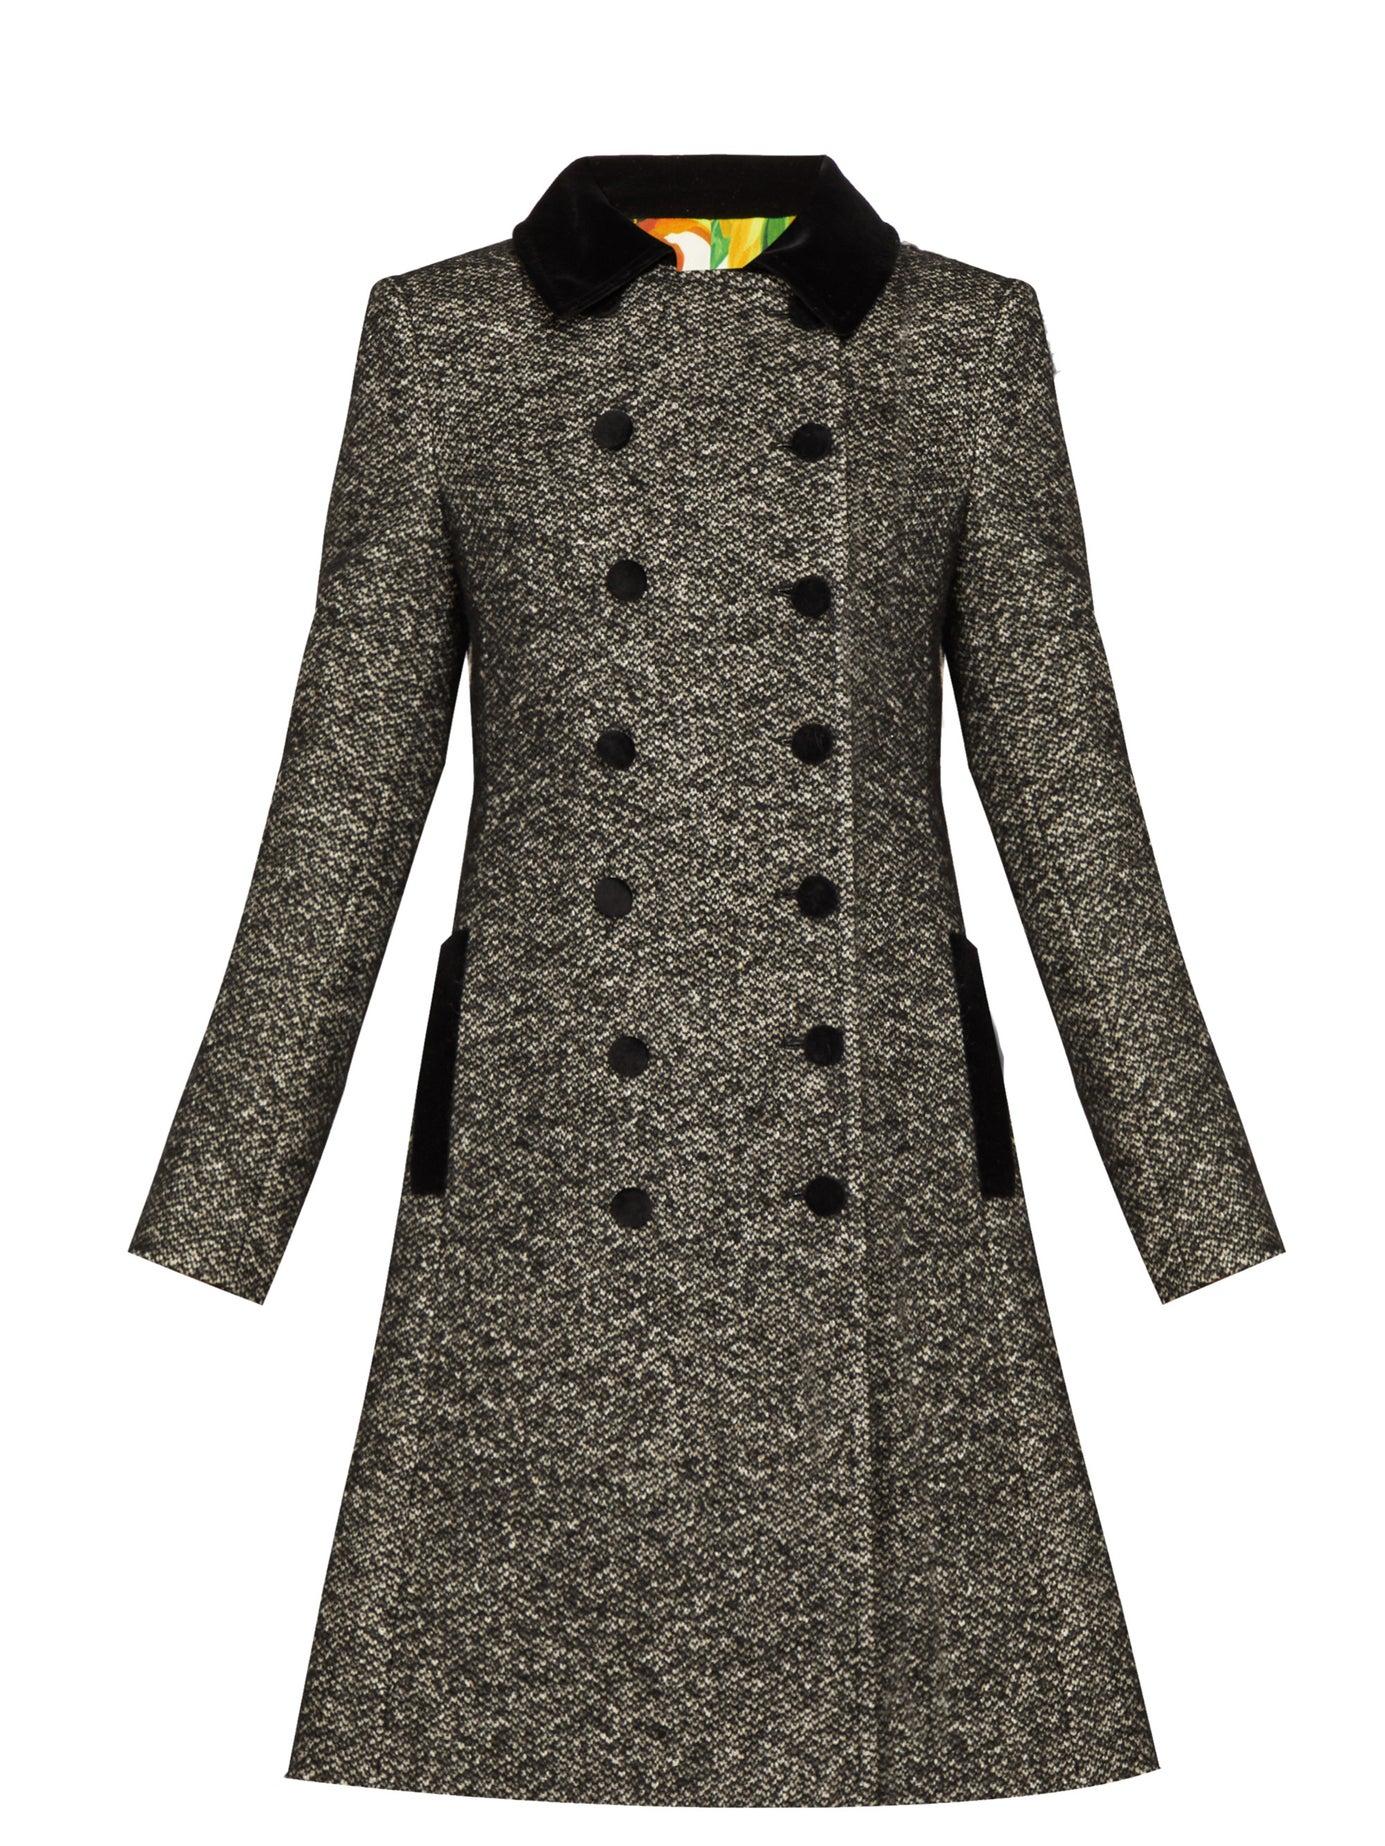 Dolce & Gabbana Double-breasted Bouclé-tweed Coat in Gray - Lyst